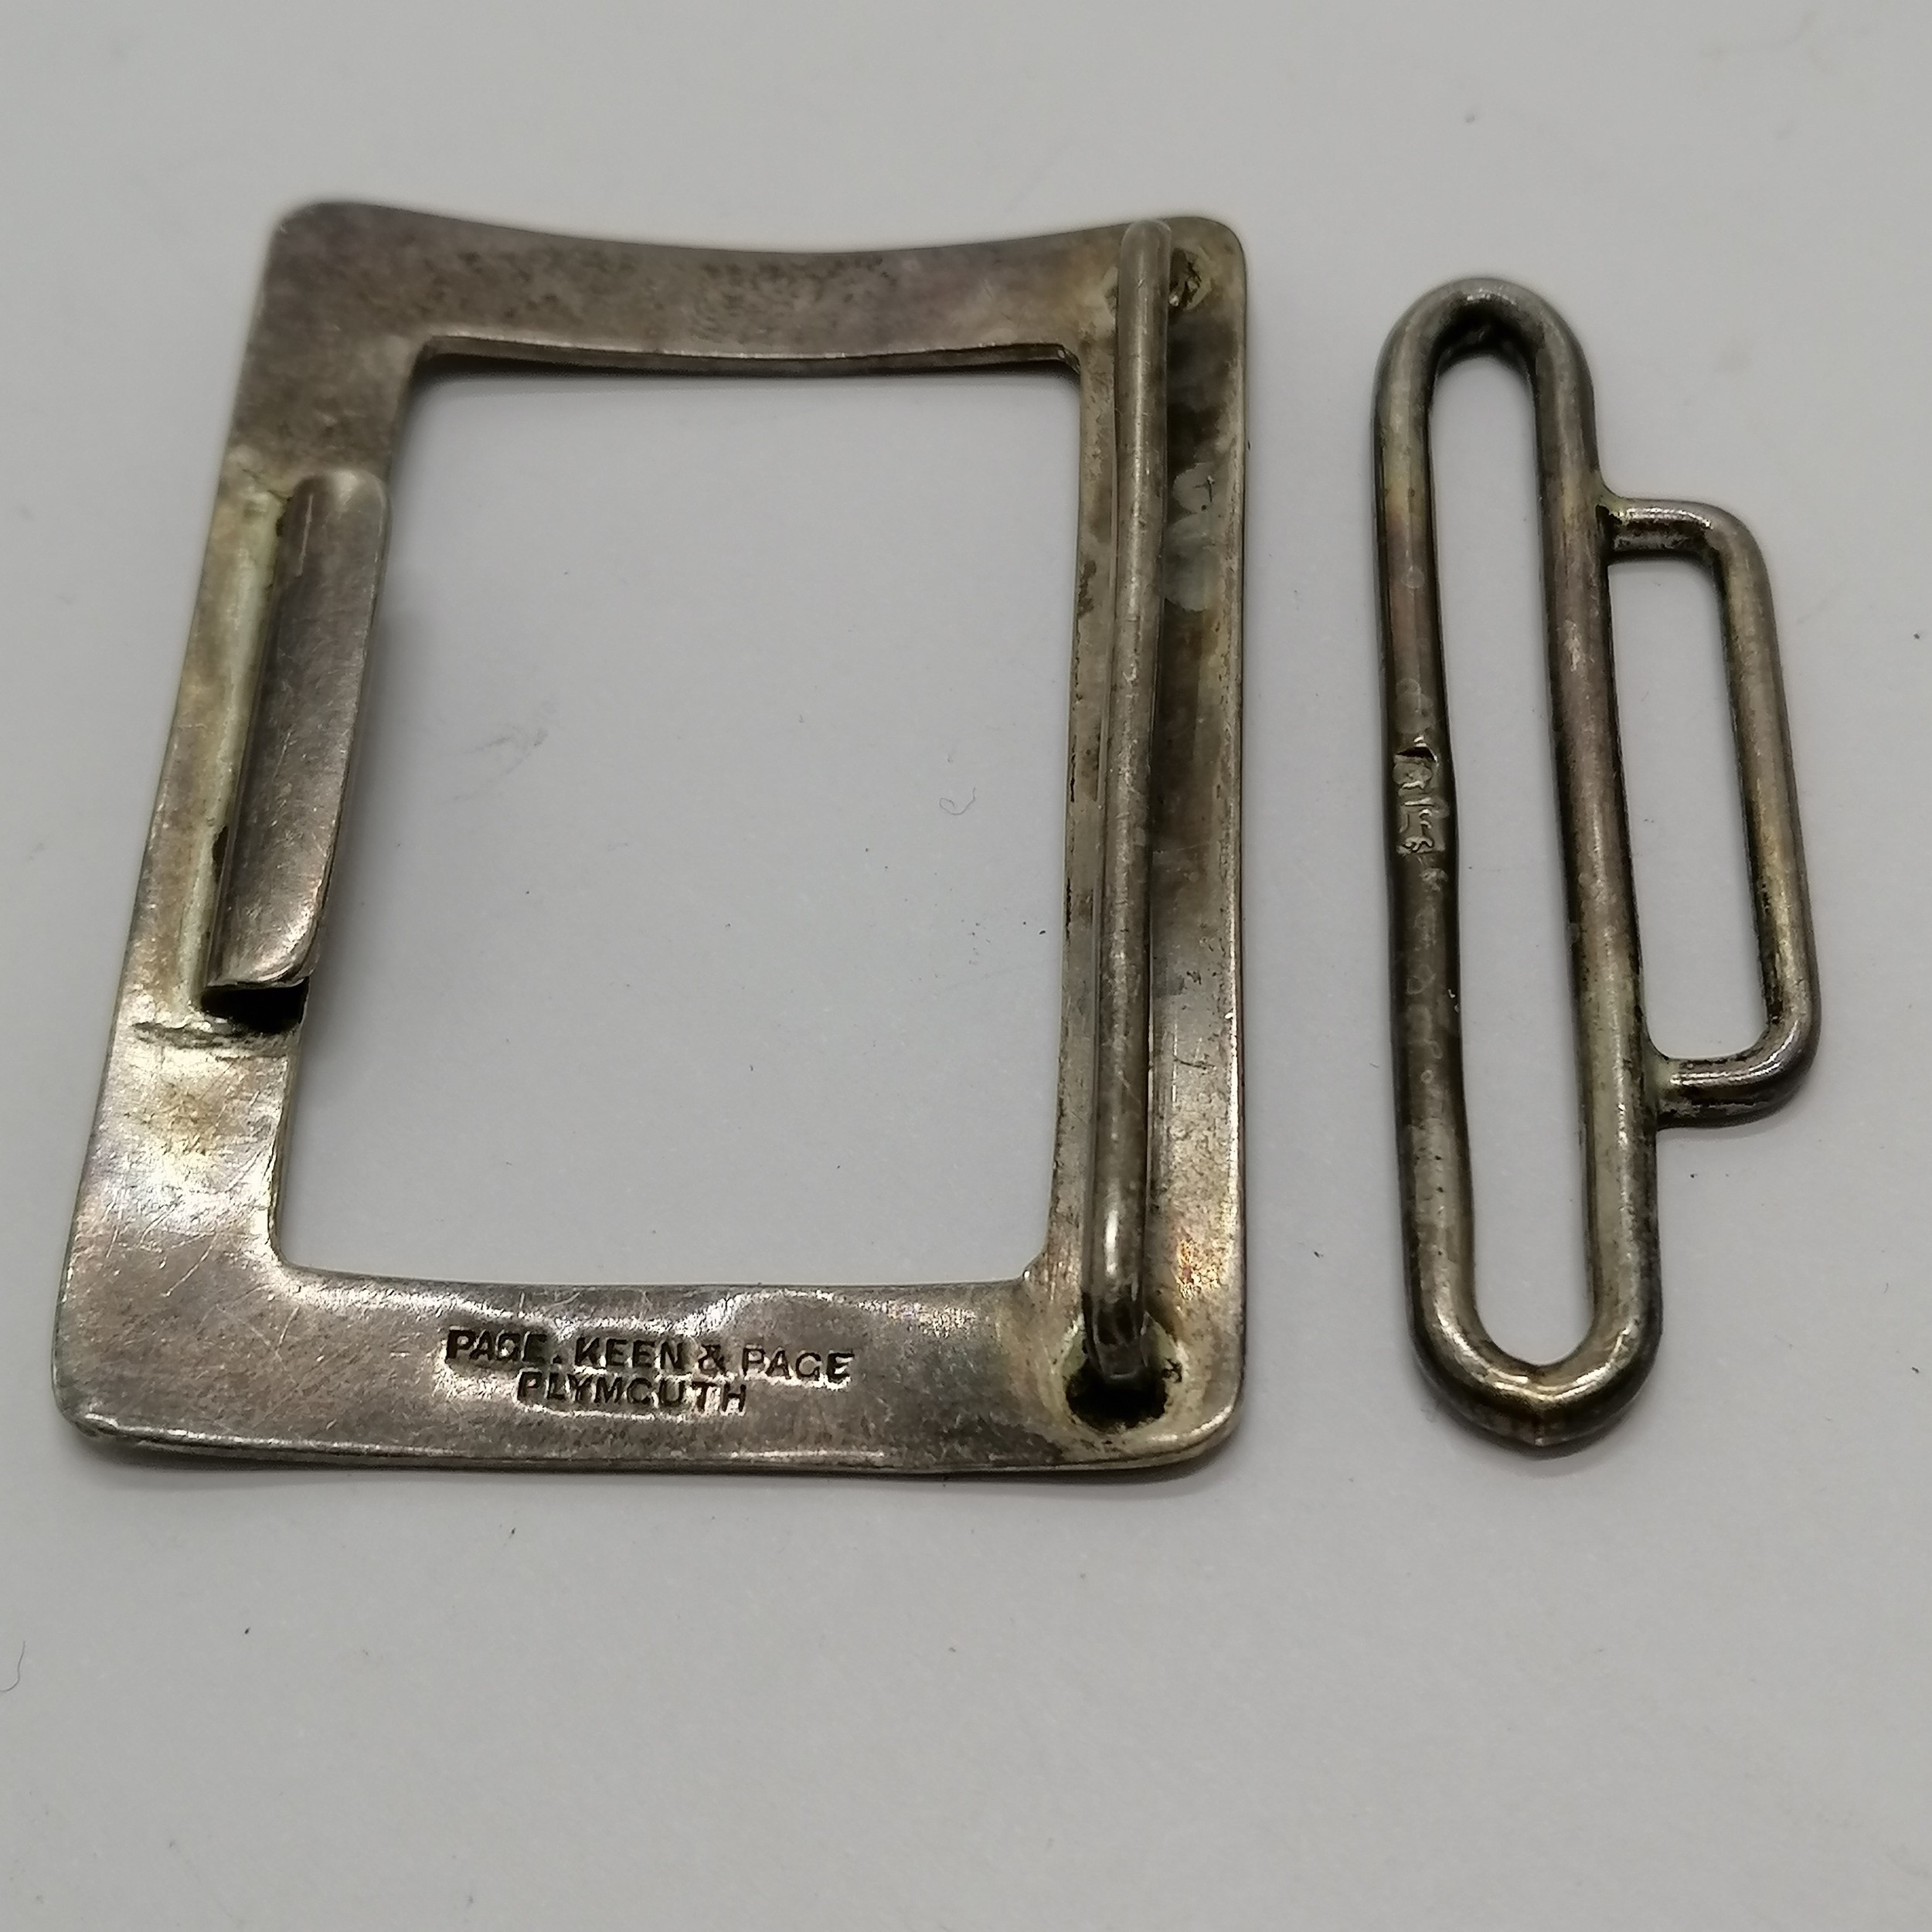 1901 silver buckle by Page, Keen & Page - 7cm x 5cm & 43.5g - Image 2 of 2